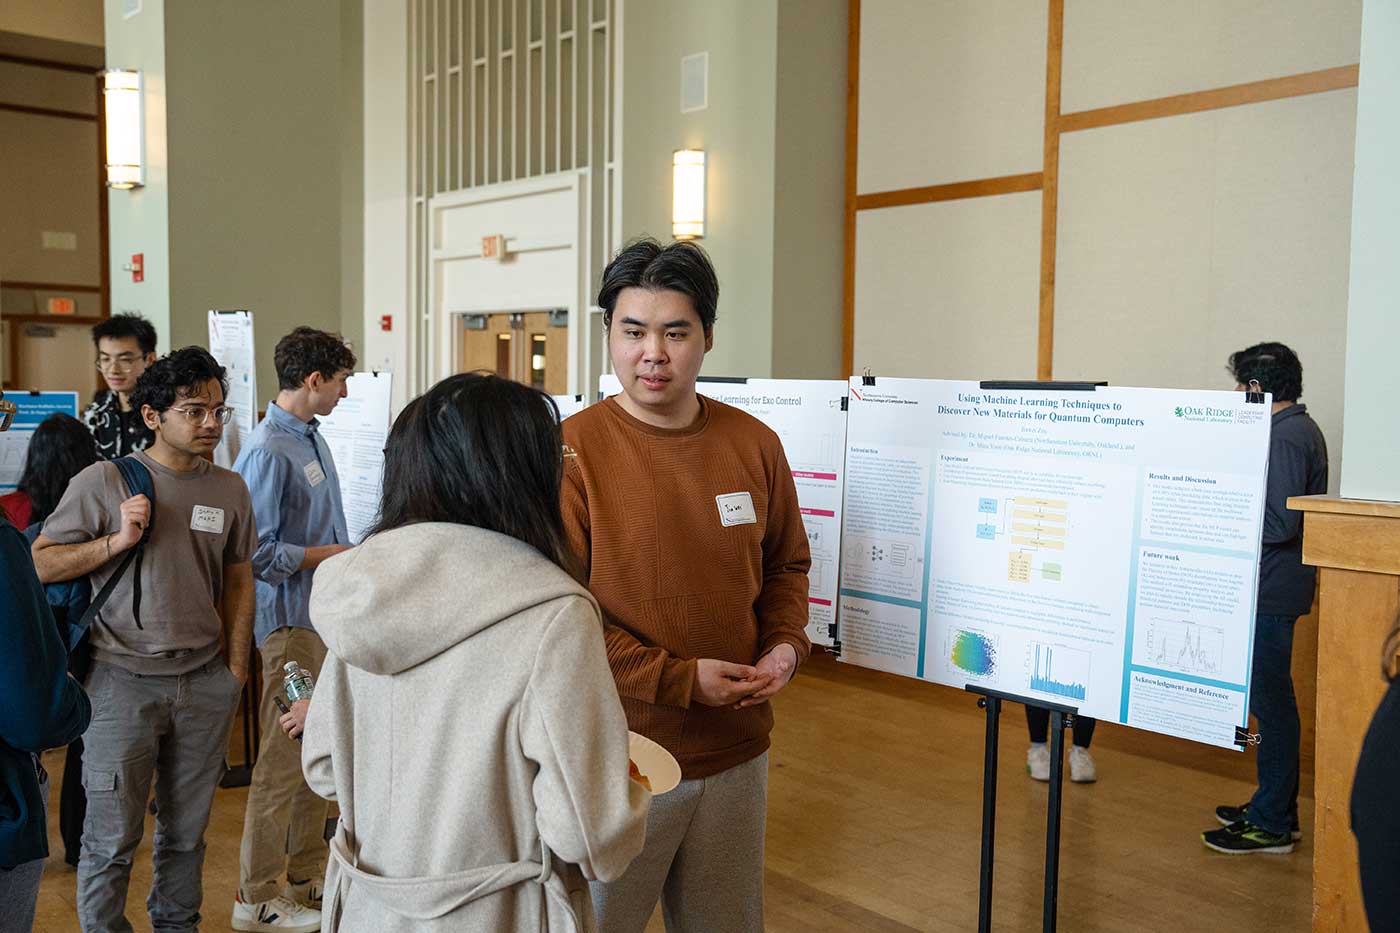 Jiawen Zou stands in front of his poster while discussing his research with another student